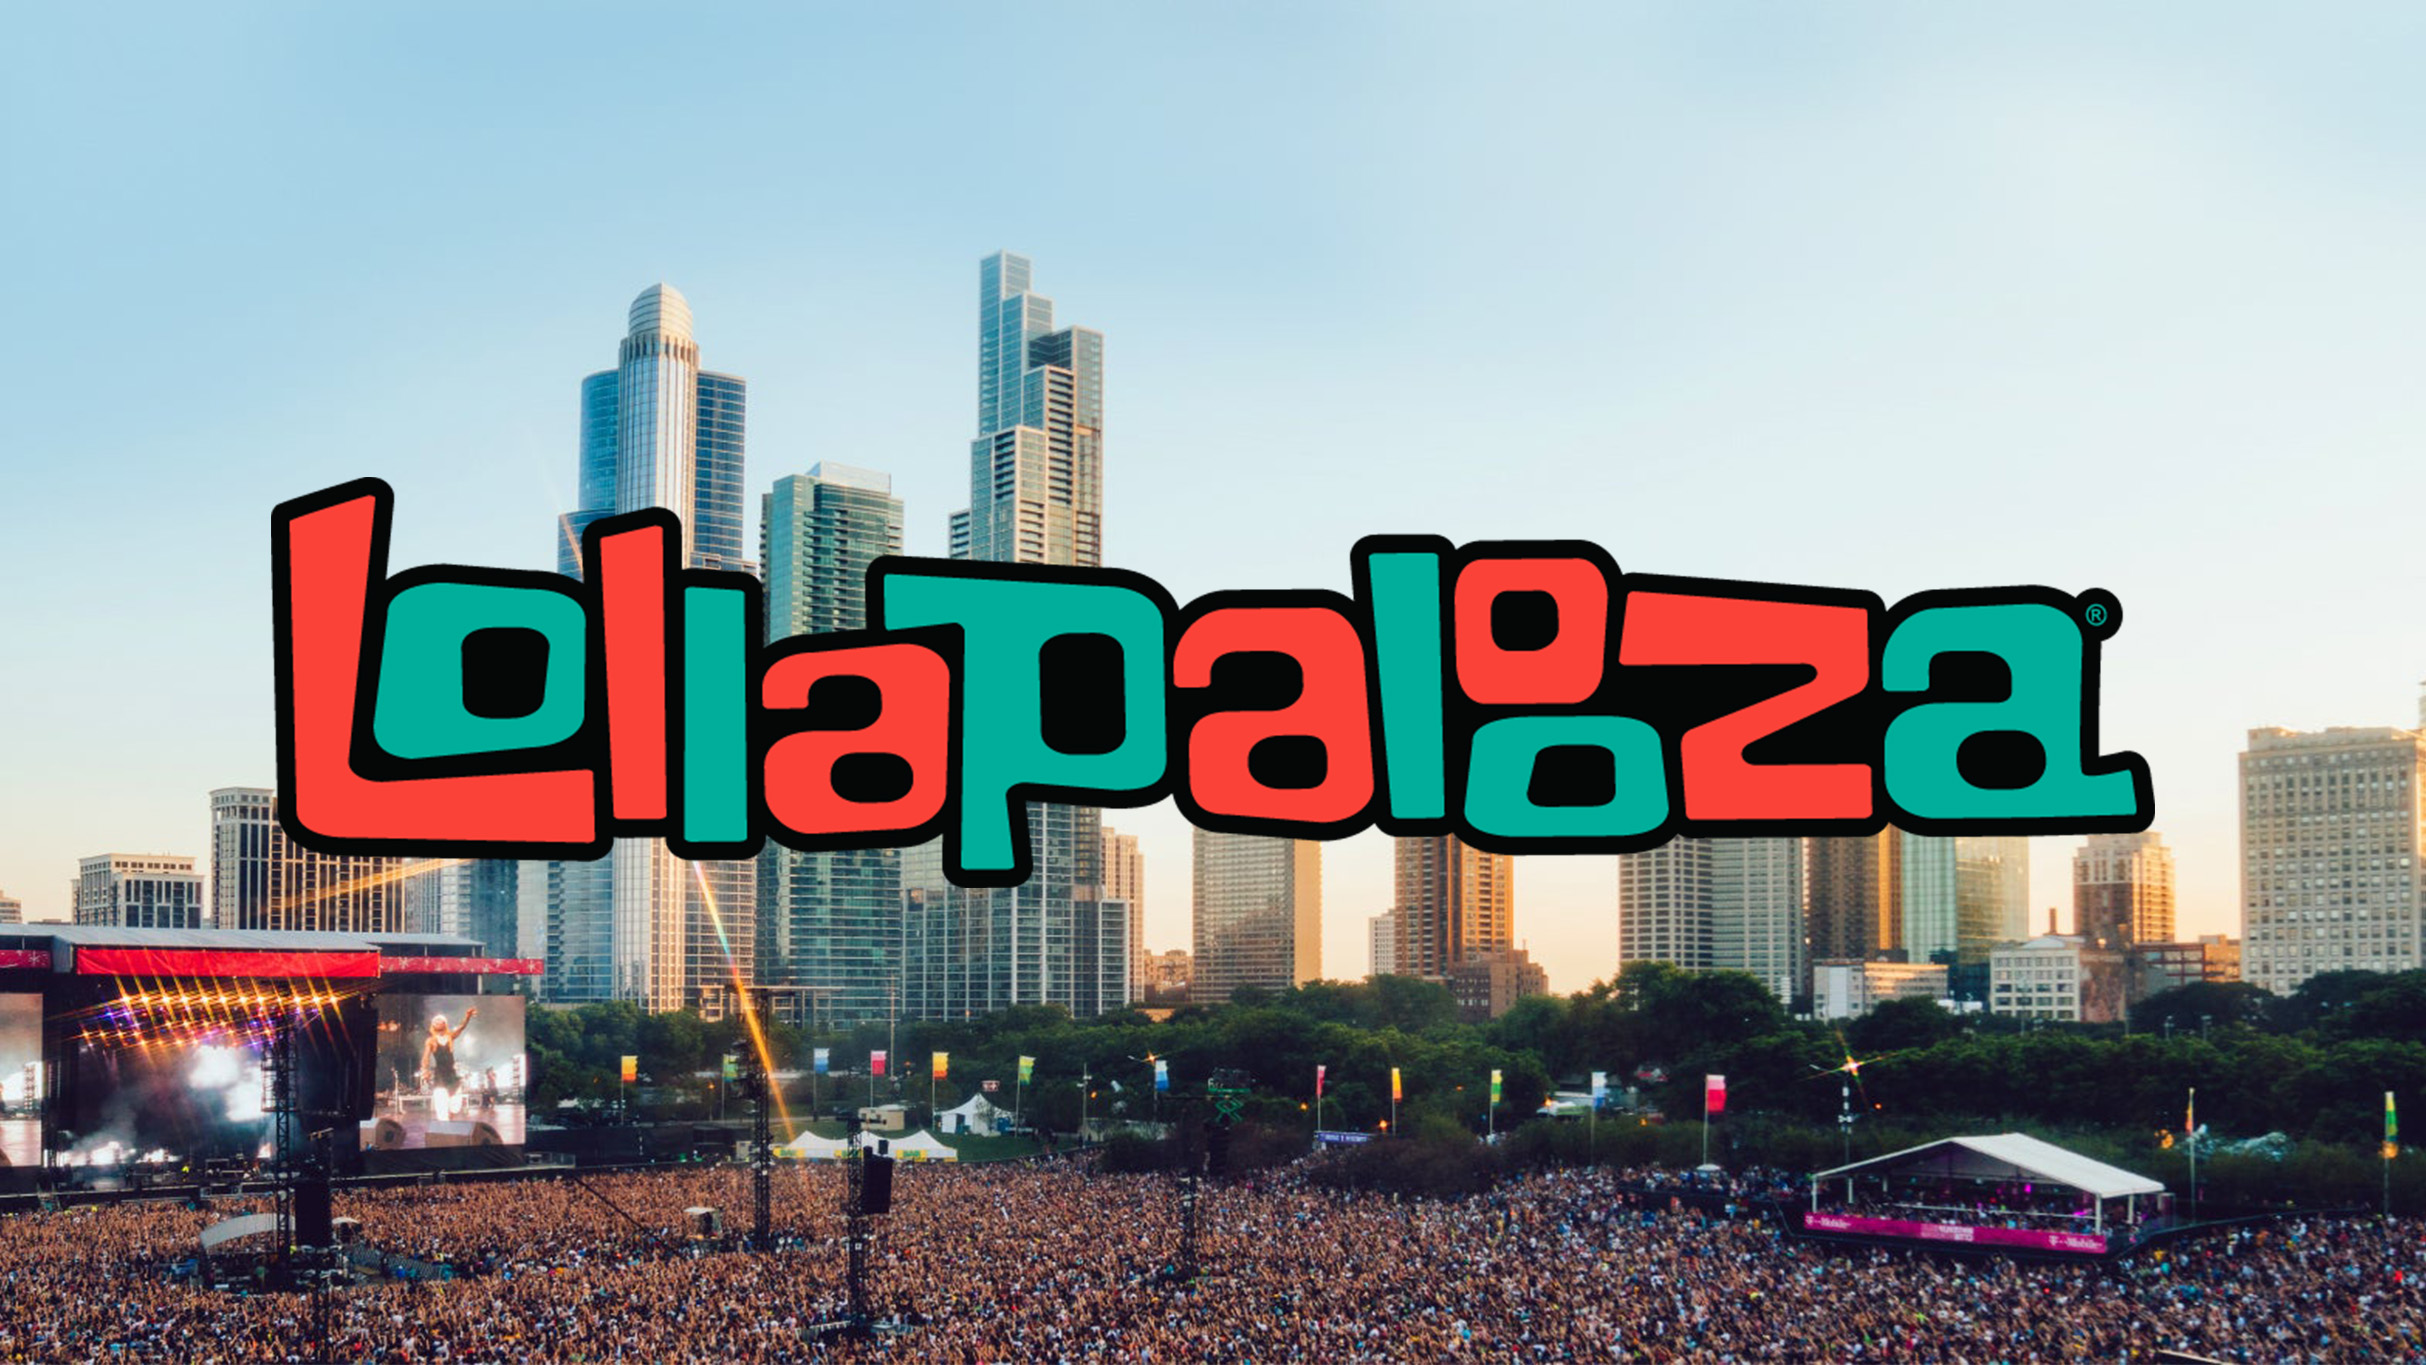 Illinois Sold $130 Million Worth of Weed in July, Thanks to Lollapalooza Music Festival